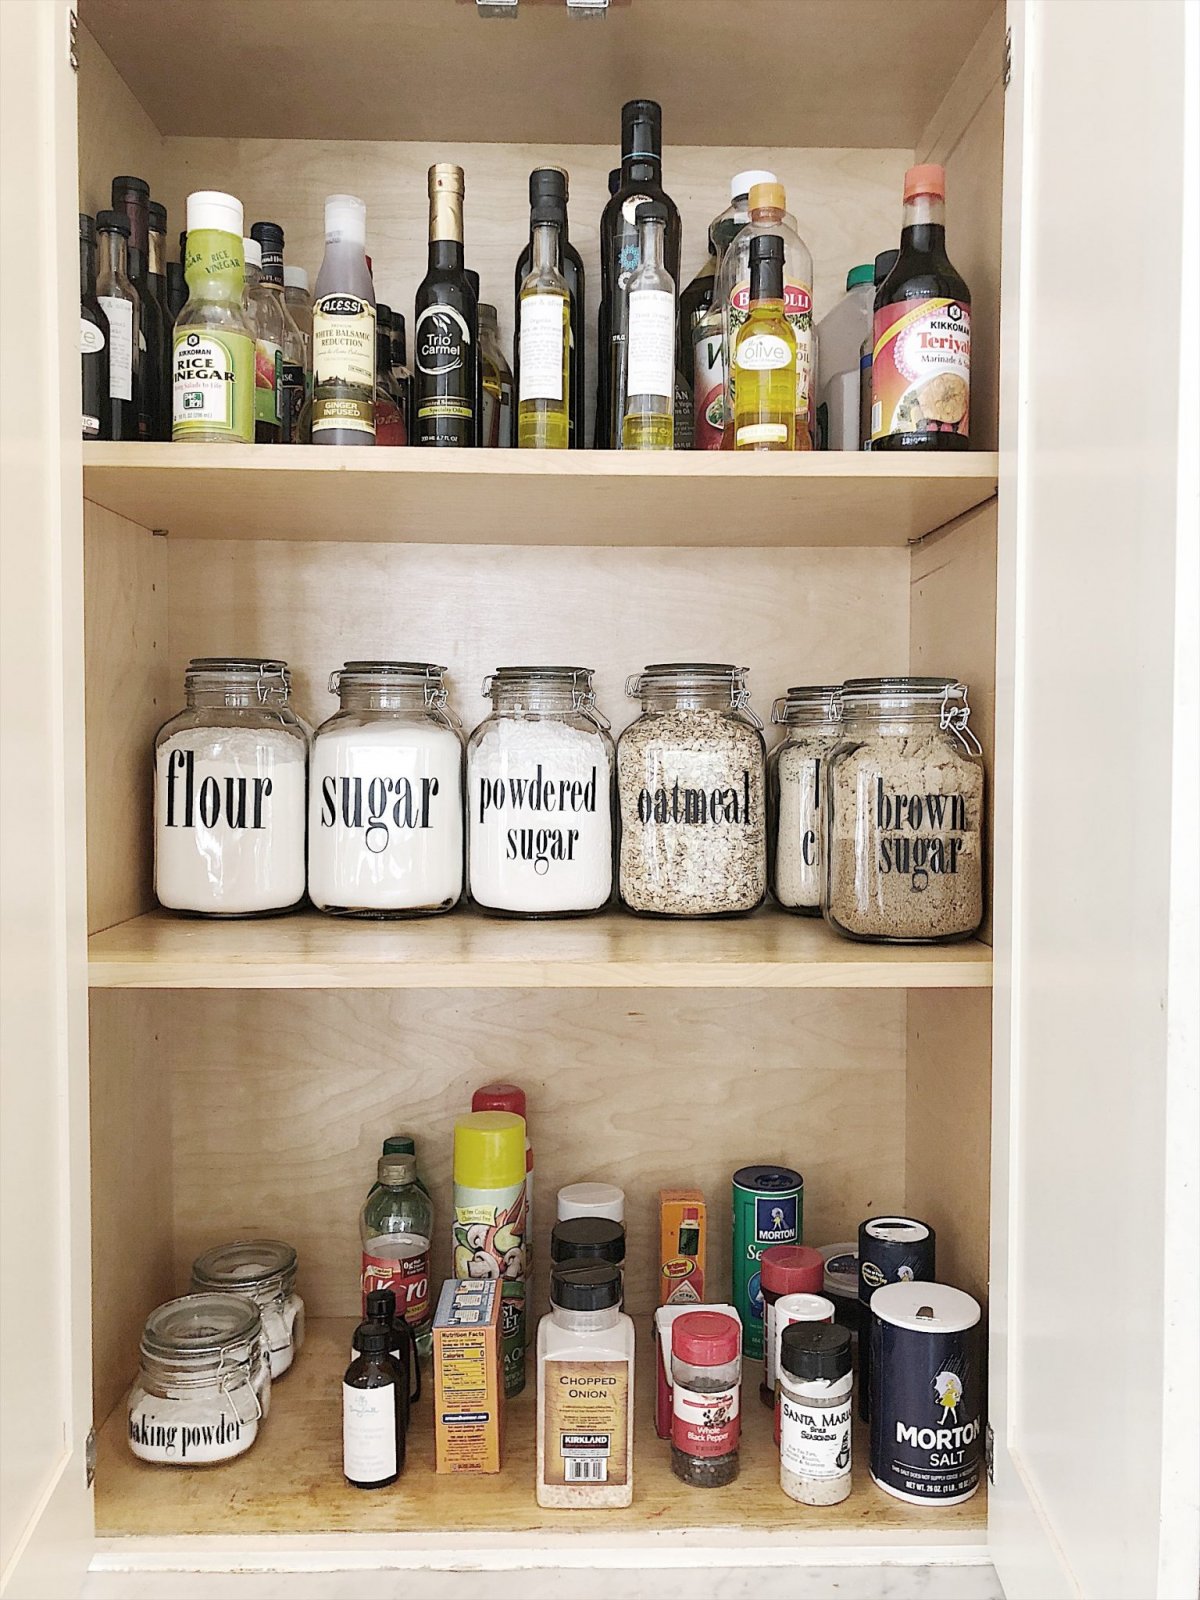 https://my100yearoldhome.com/wp-content/uploads/2019/12/how-to-organize-a-pantry-13-scaled.jpg